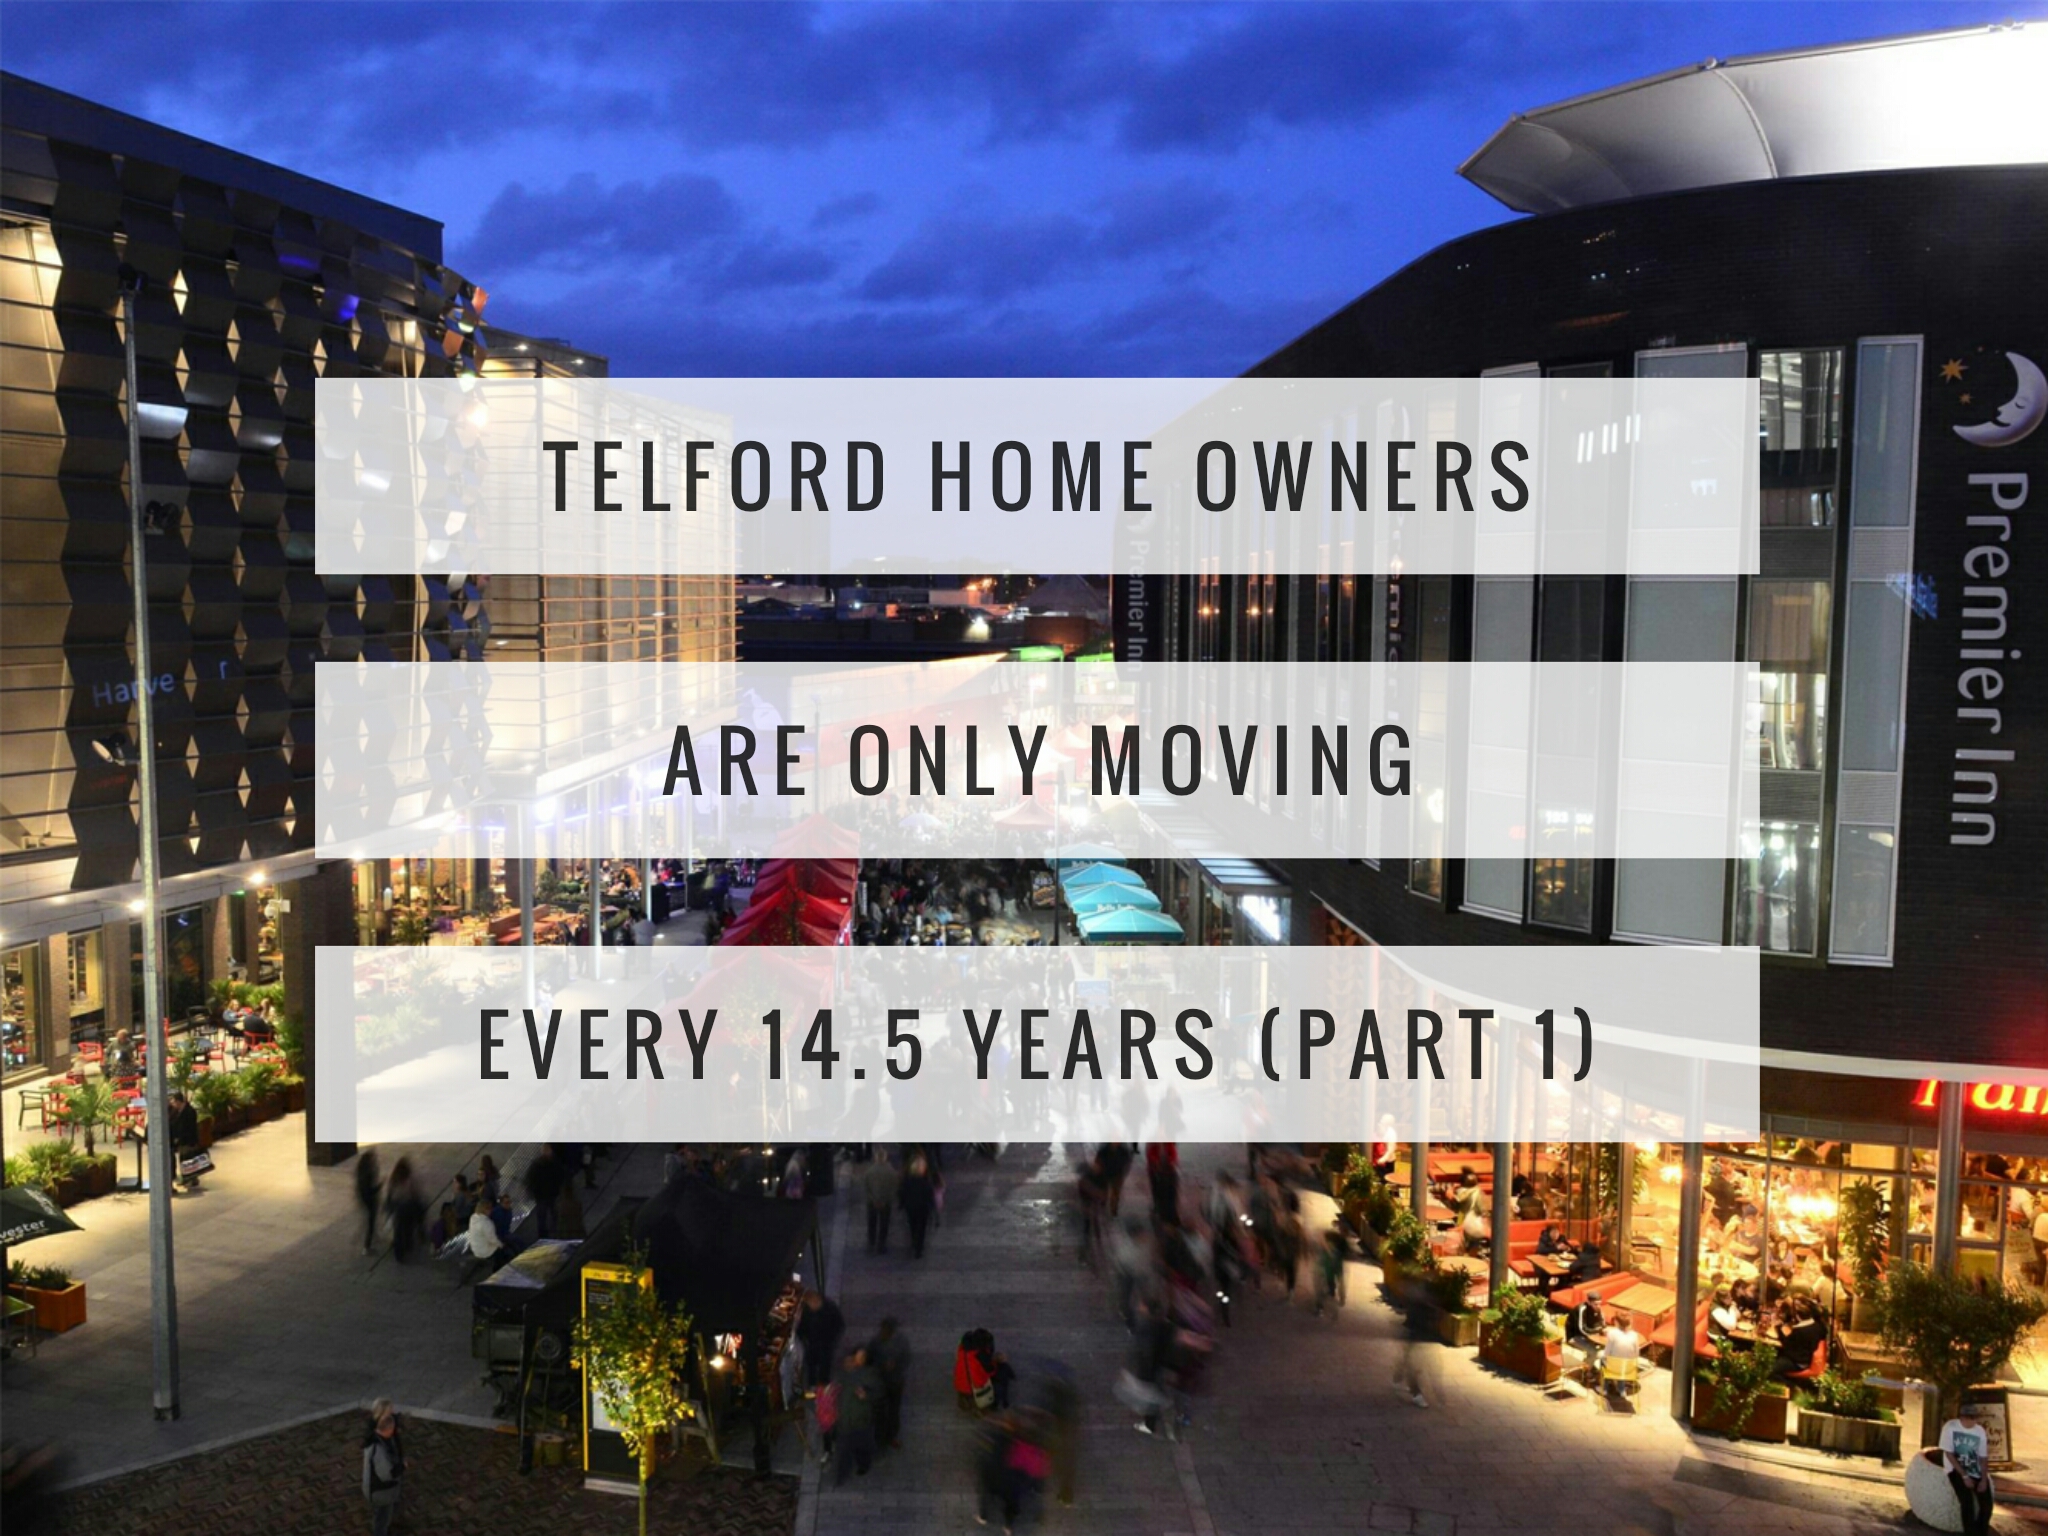 Telford Home Owners Are Only Moving Every 14.5 Years (Part 1)